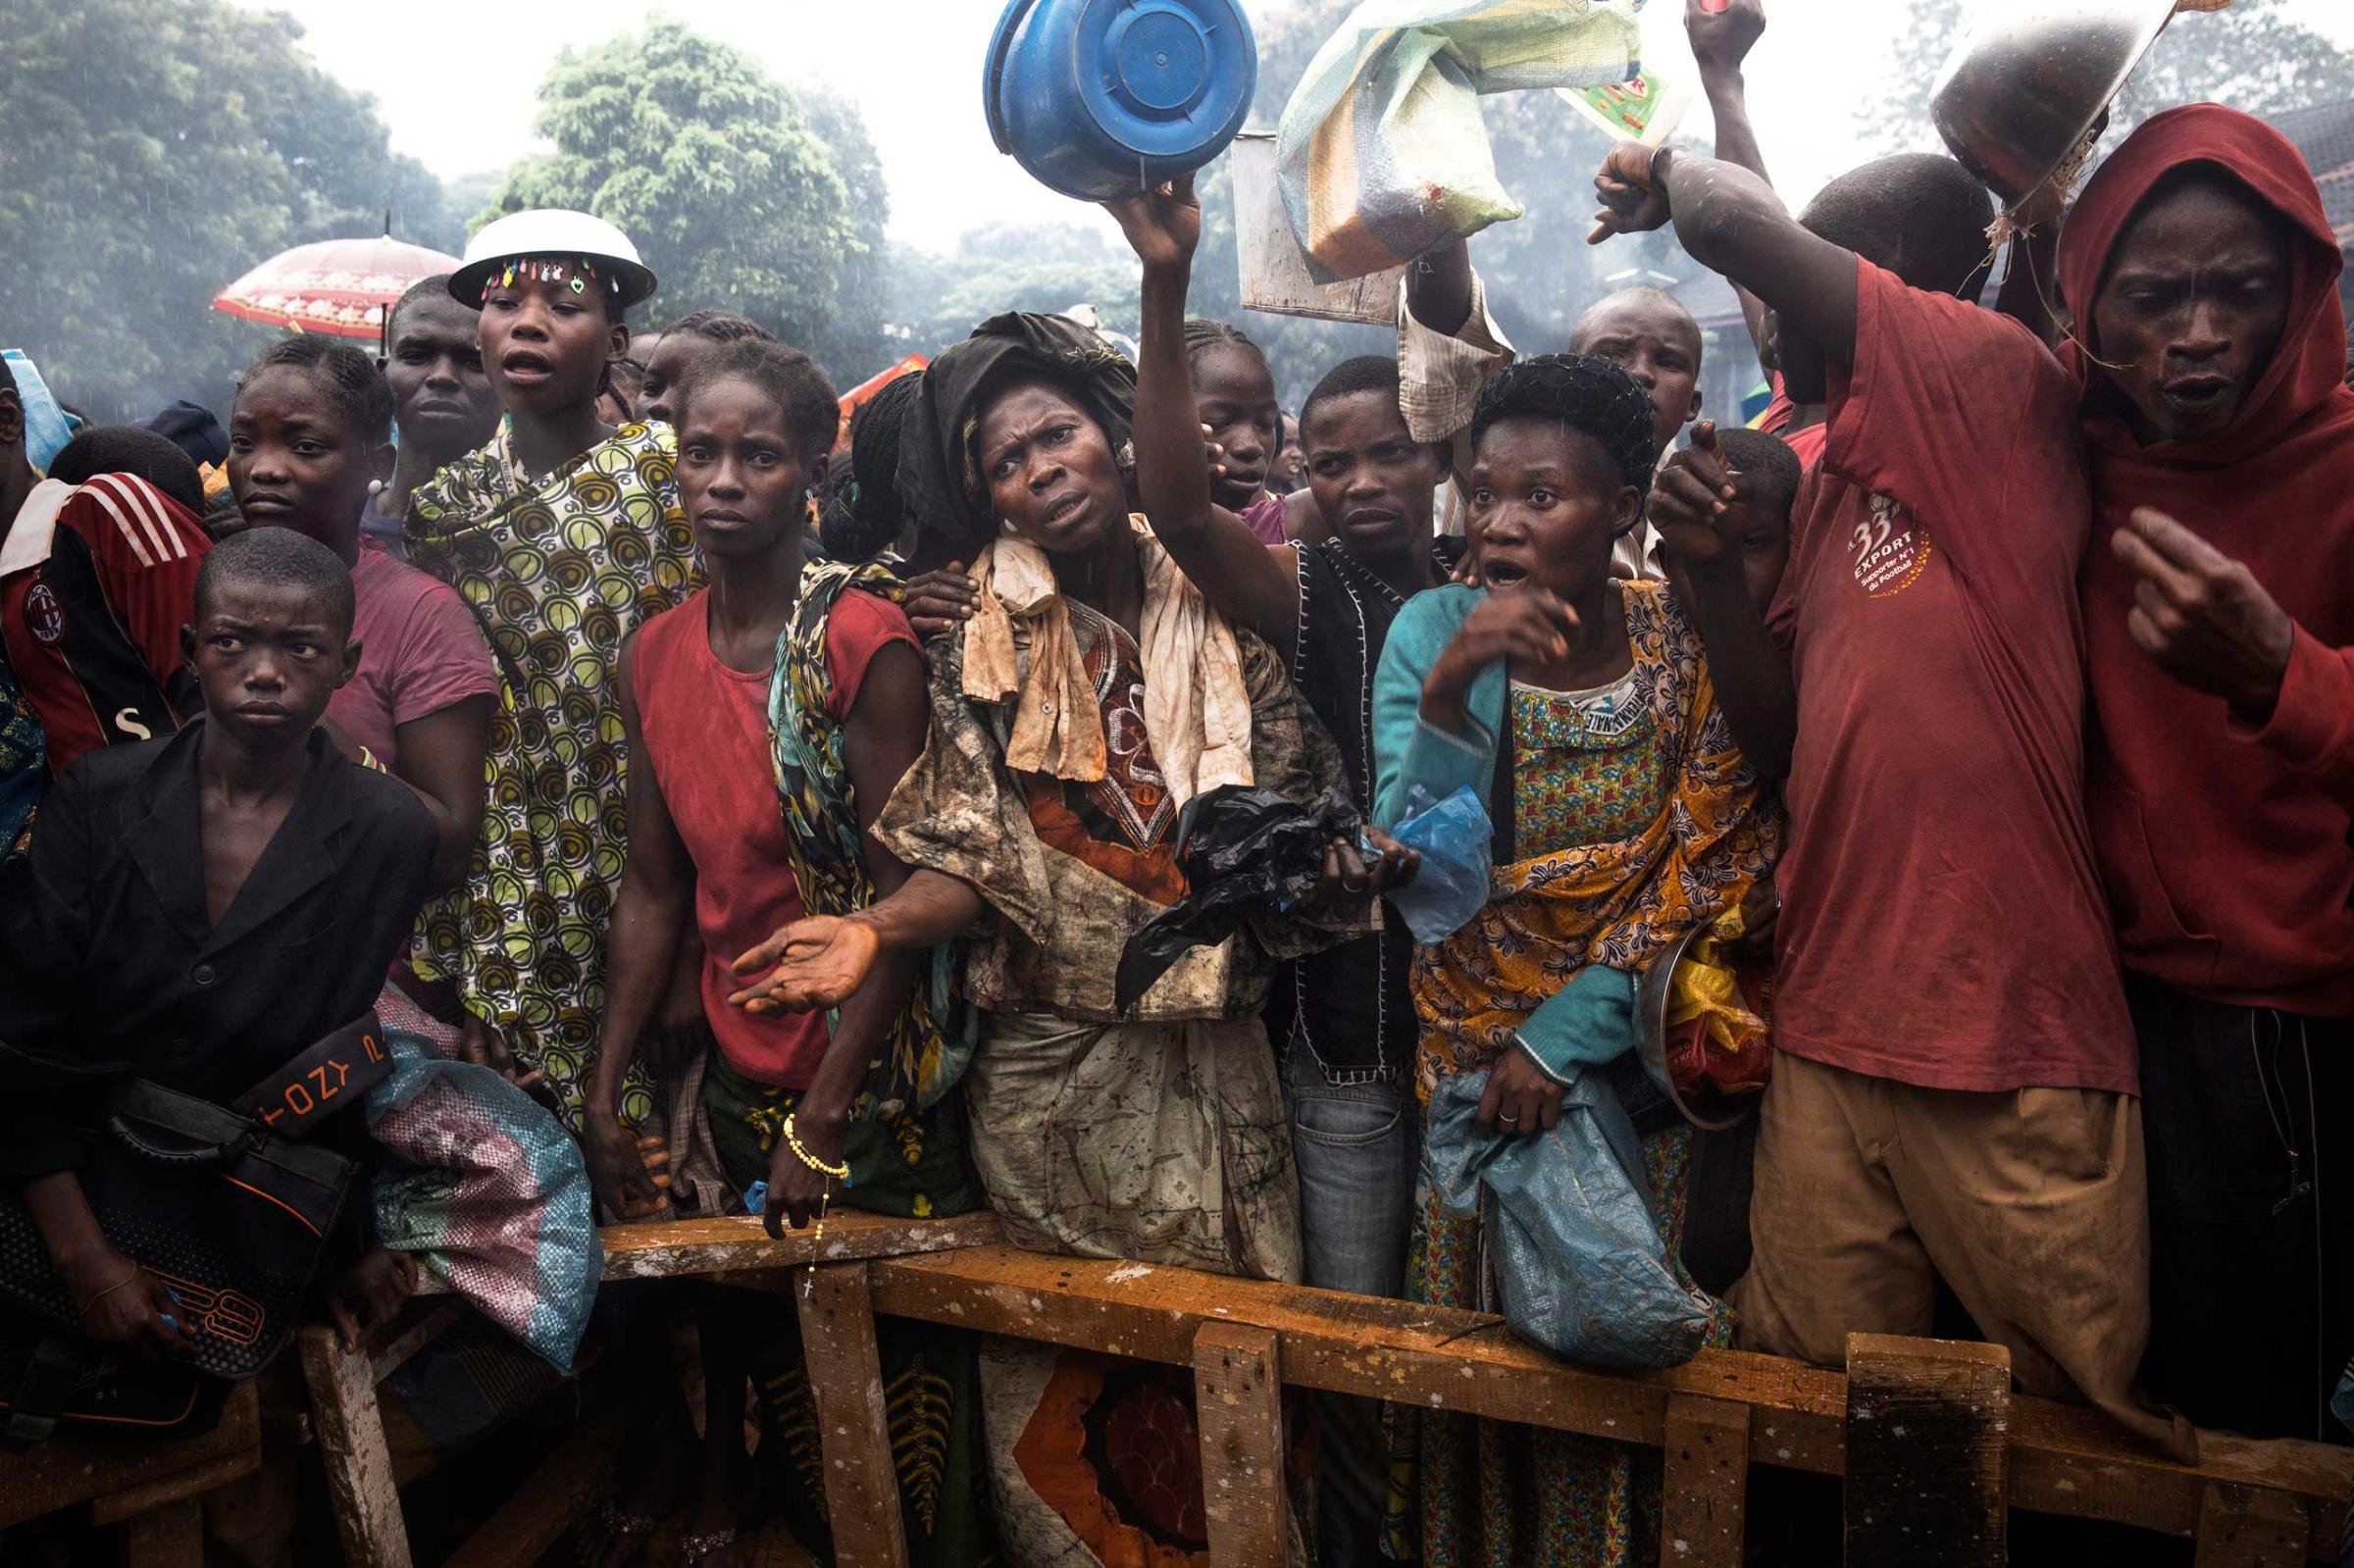 Dec. 9, 2013: Internally displaced people wait for food at the Don Bosco Center in Bangui. Some 18,000 Christians took refuge here.